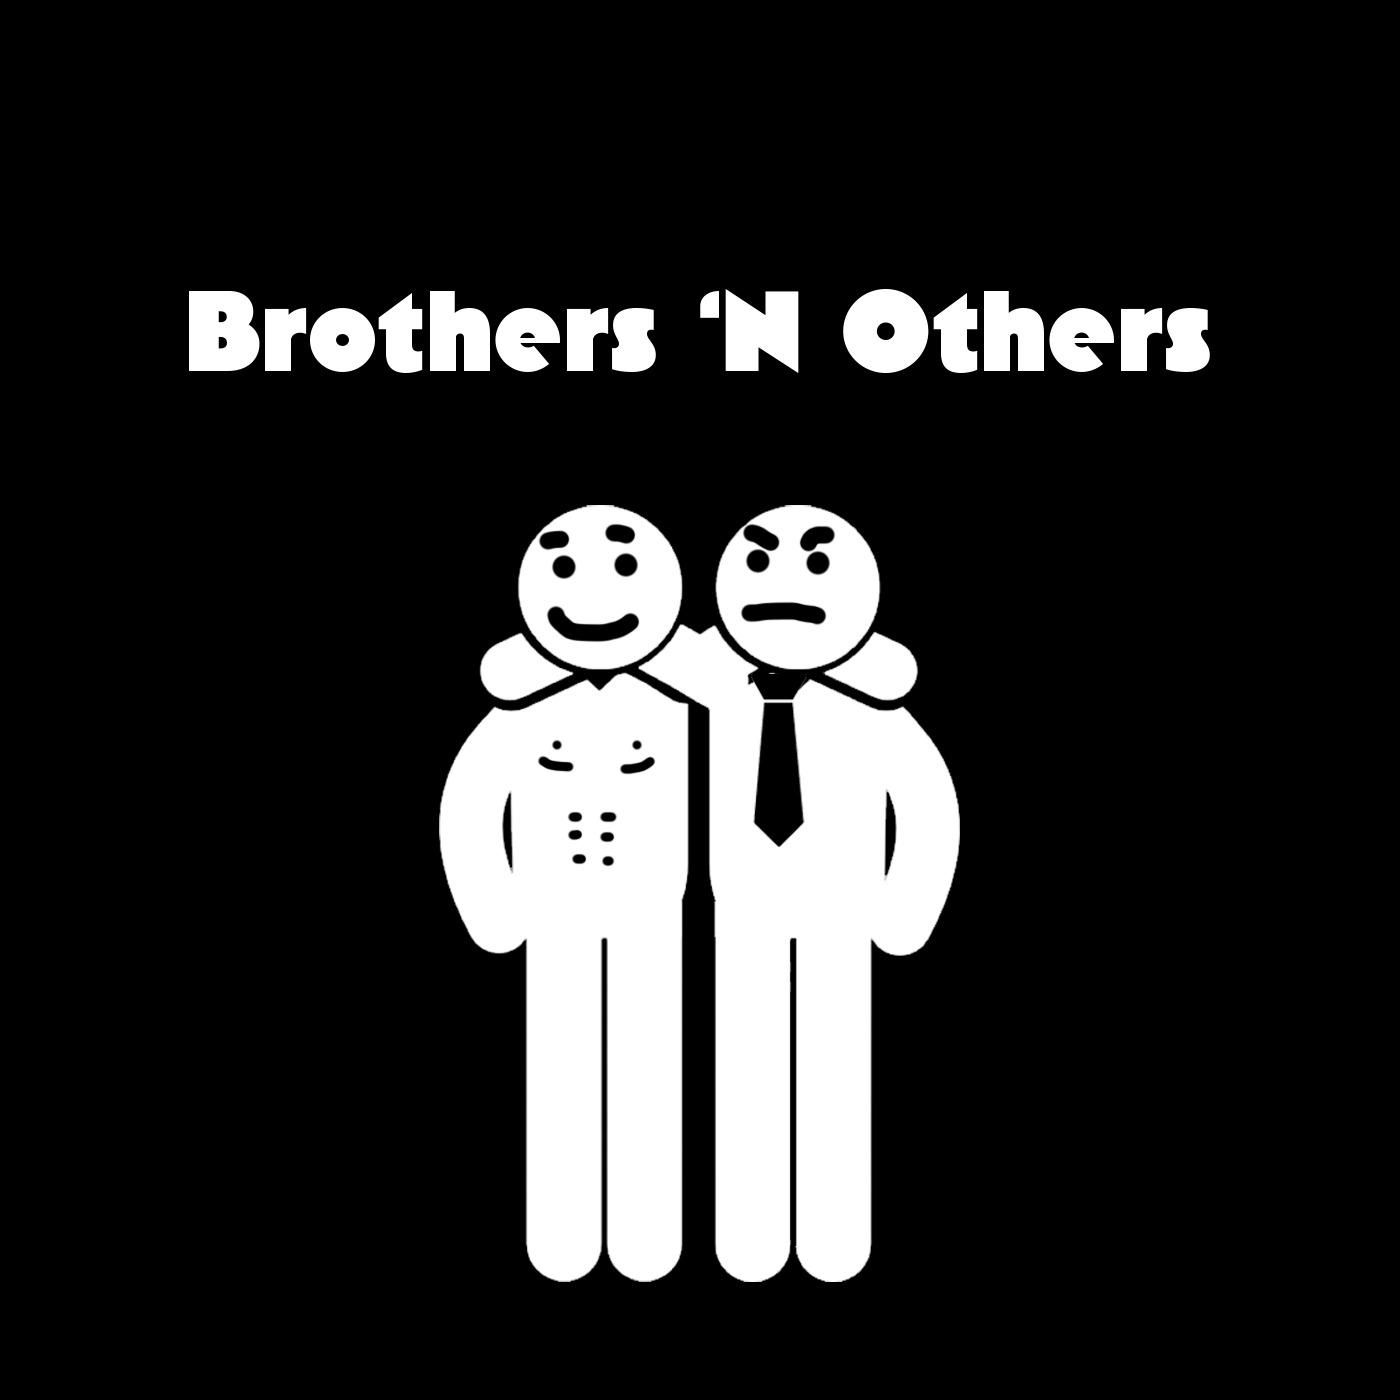 Brothers 'N others